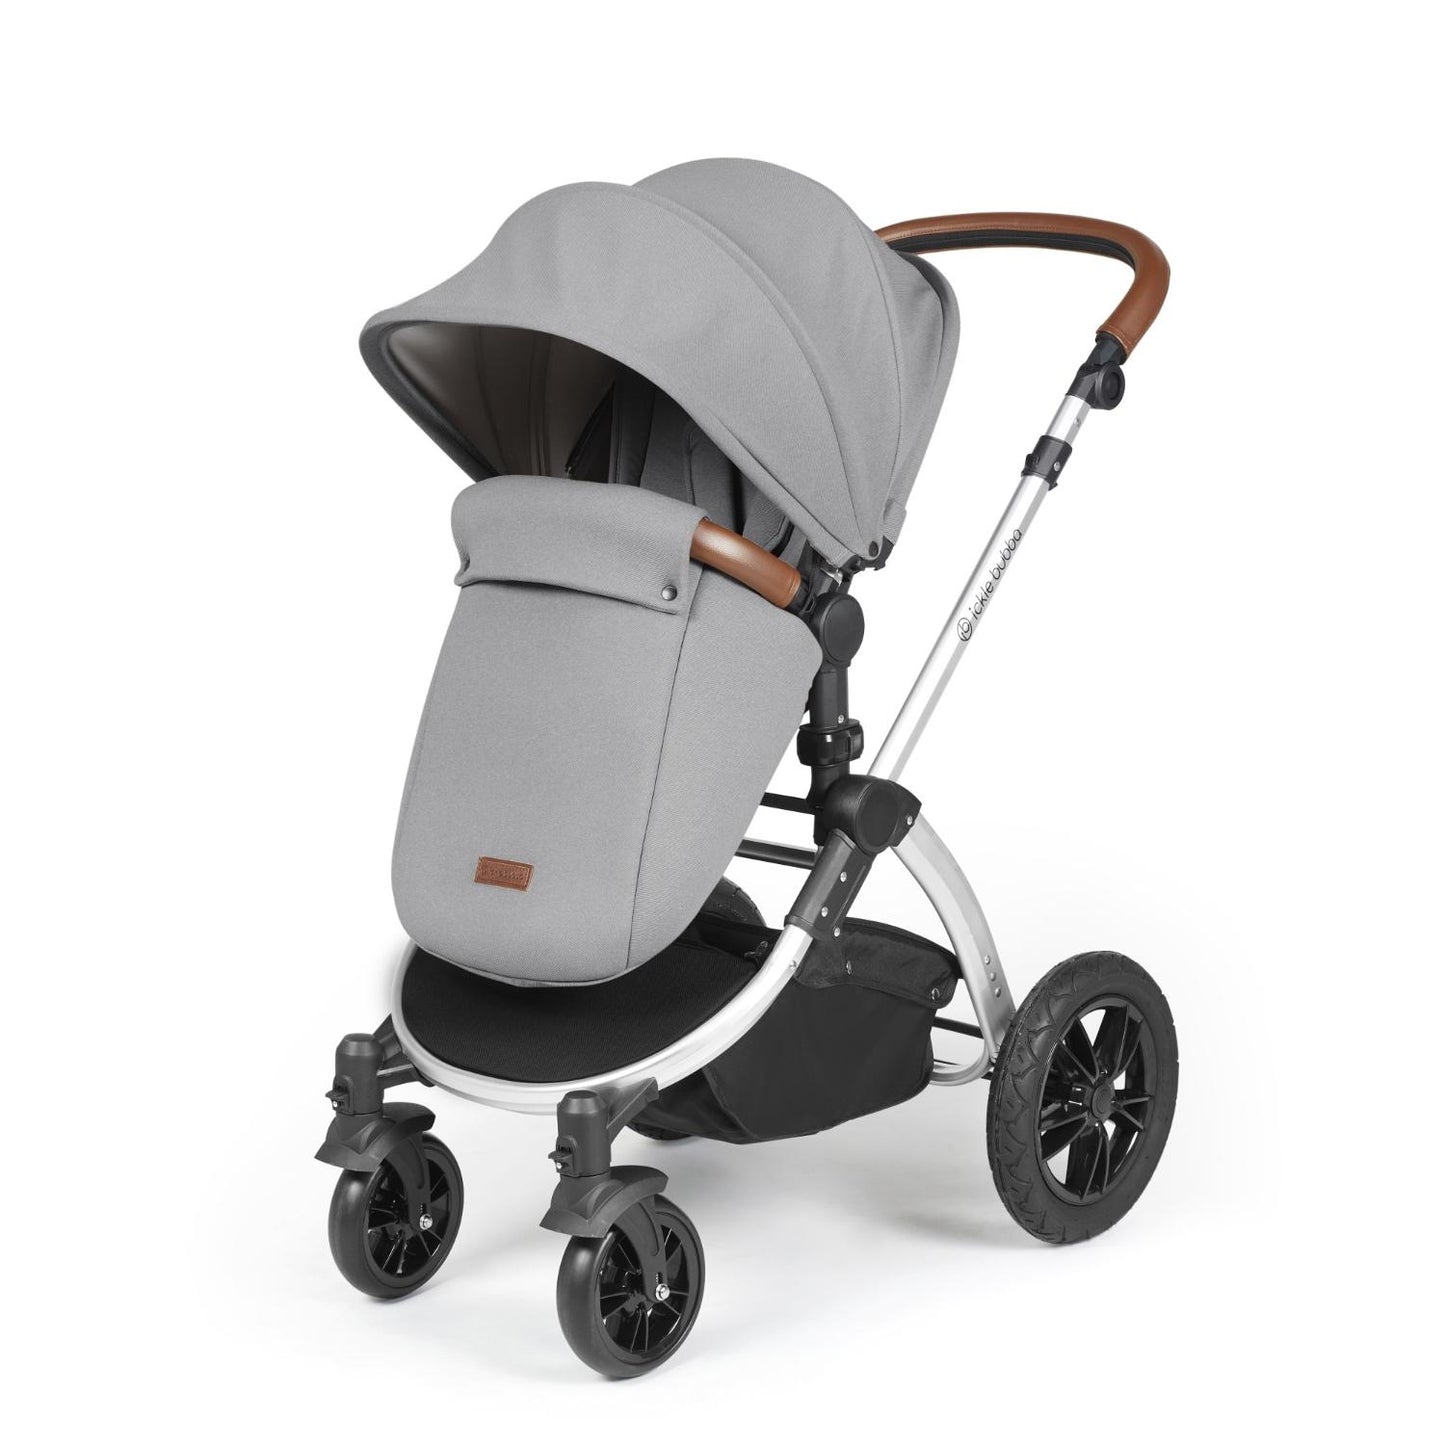 Ickle Bubba Stomp Luxe Pushchair with foot warmer attached in Pearl Grey colour with silver chassis and tan handle